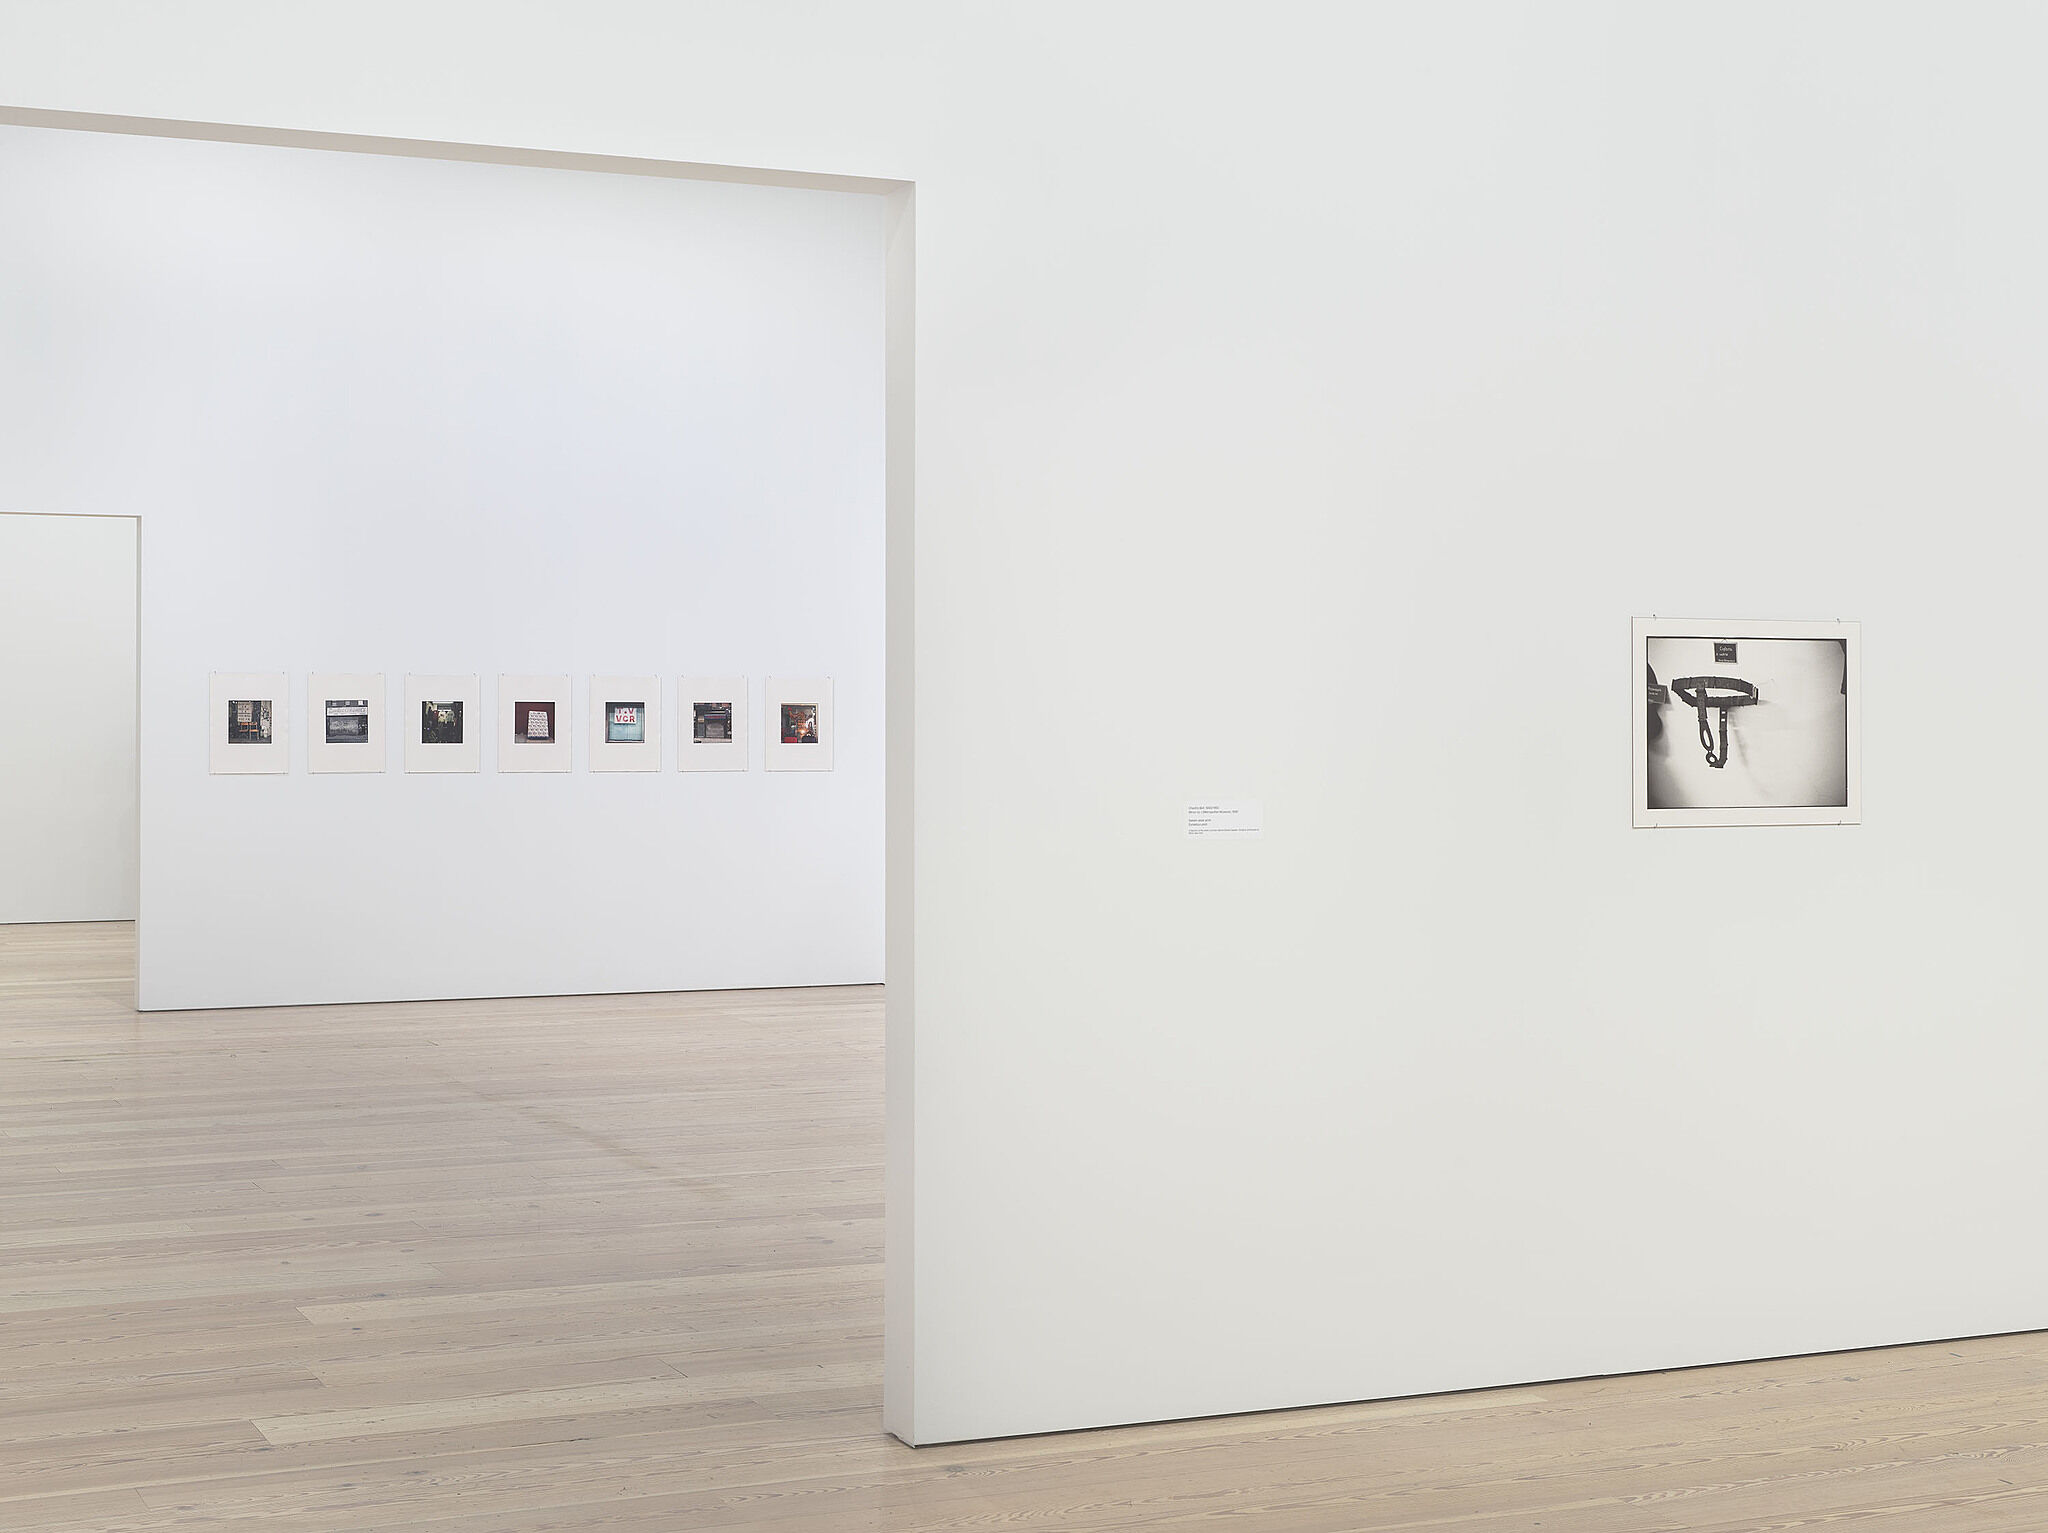 A photo of the Whitney galleries with various photos on the walls.